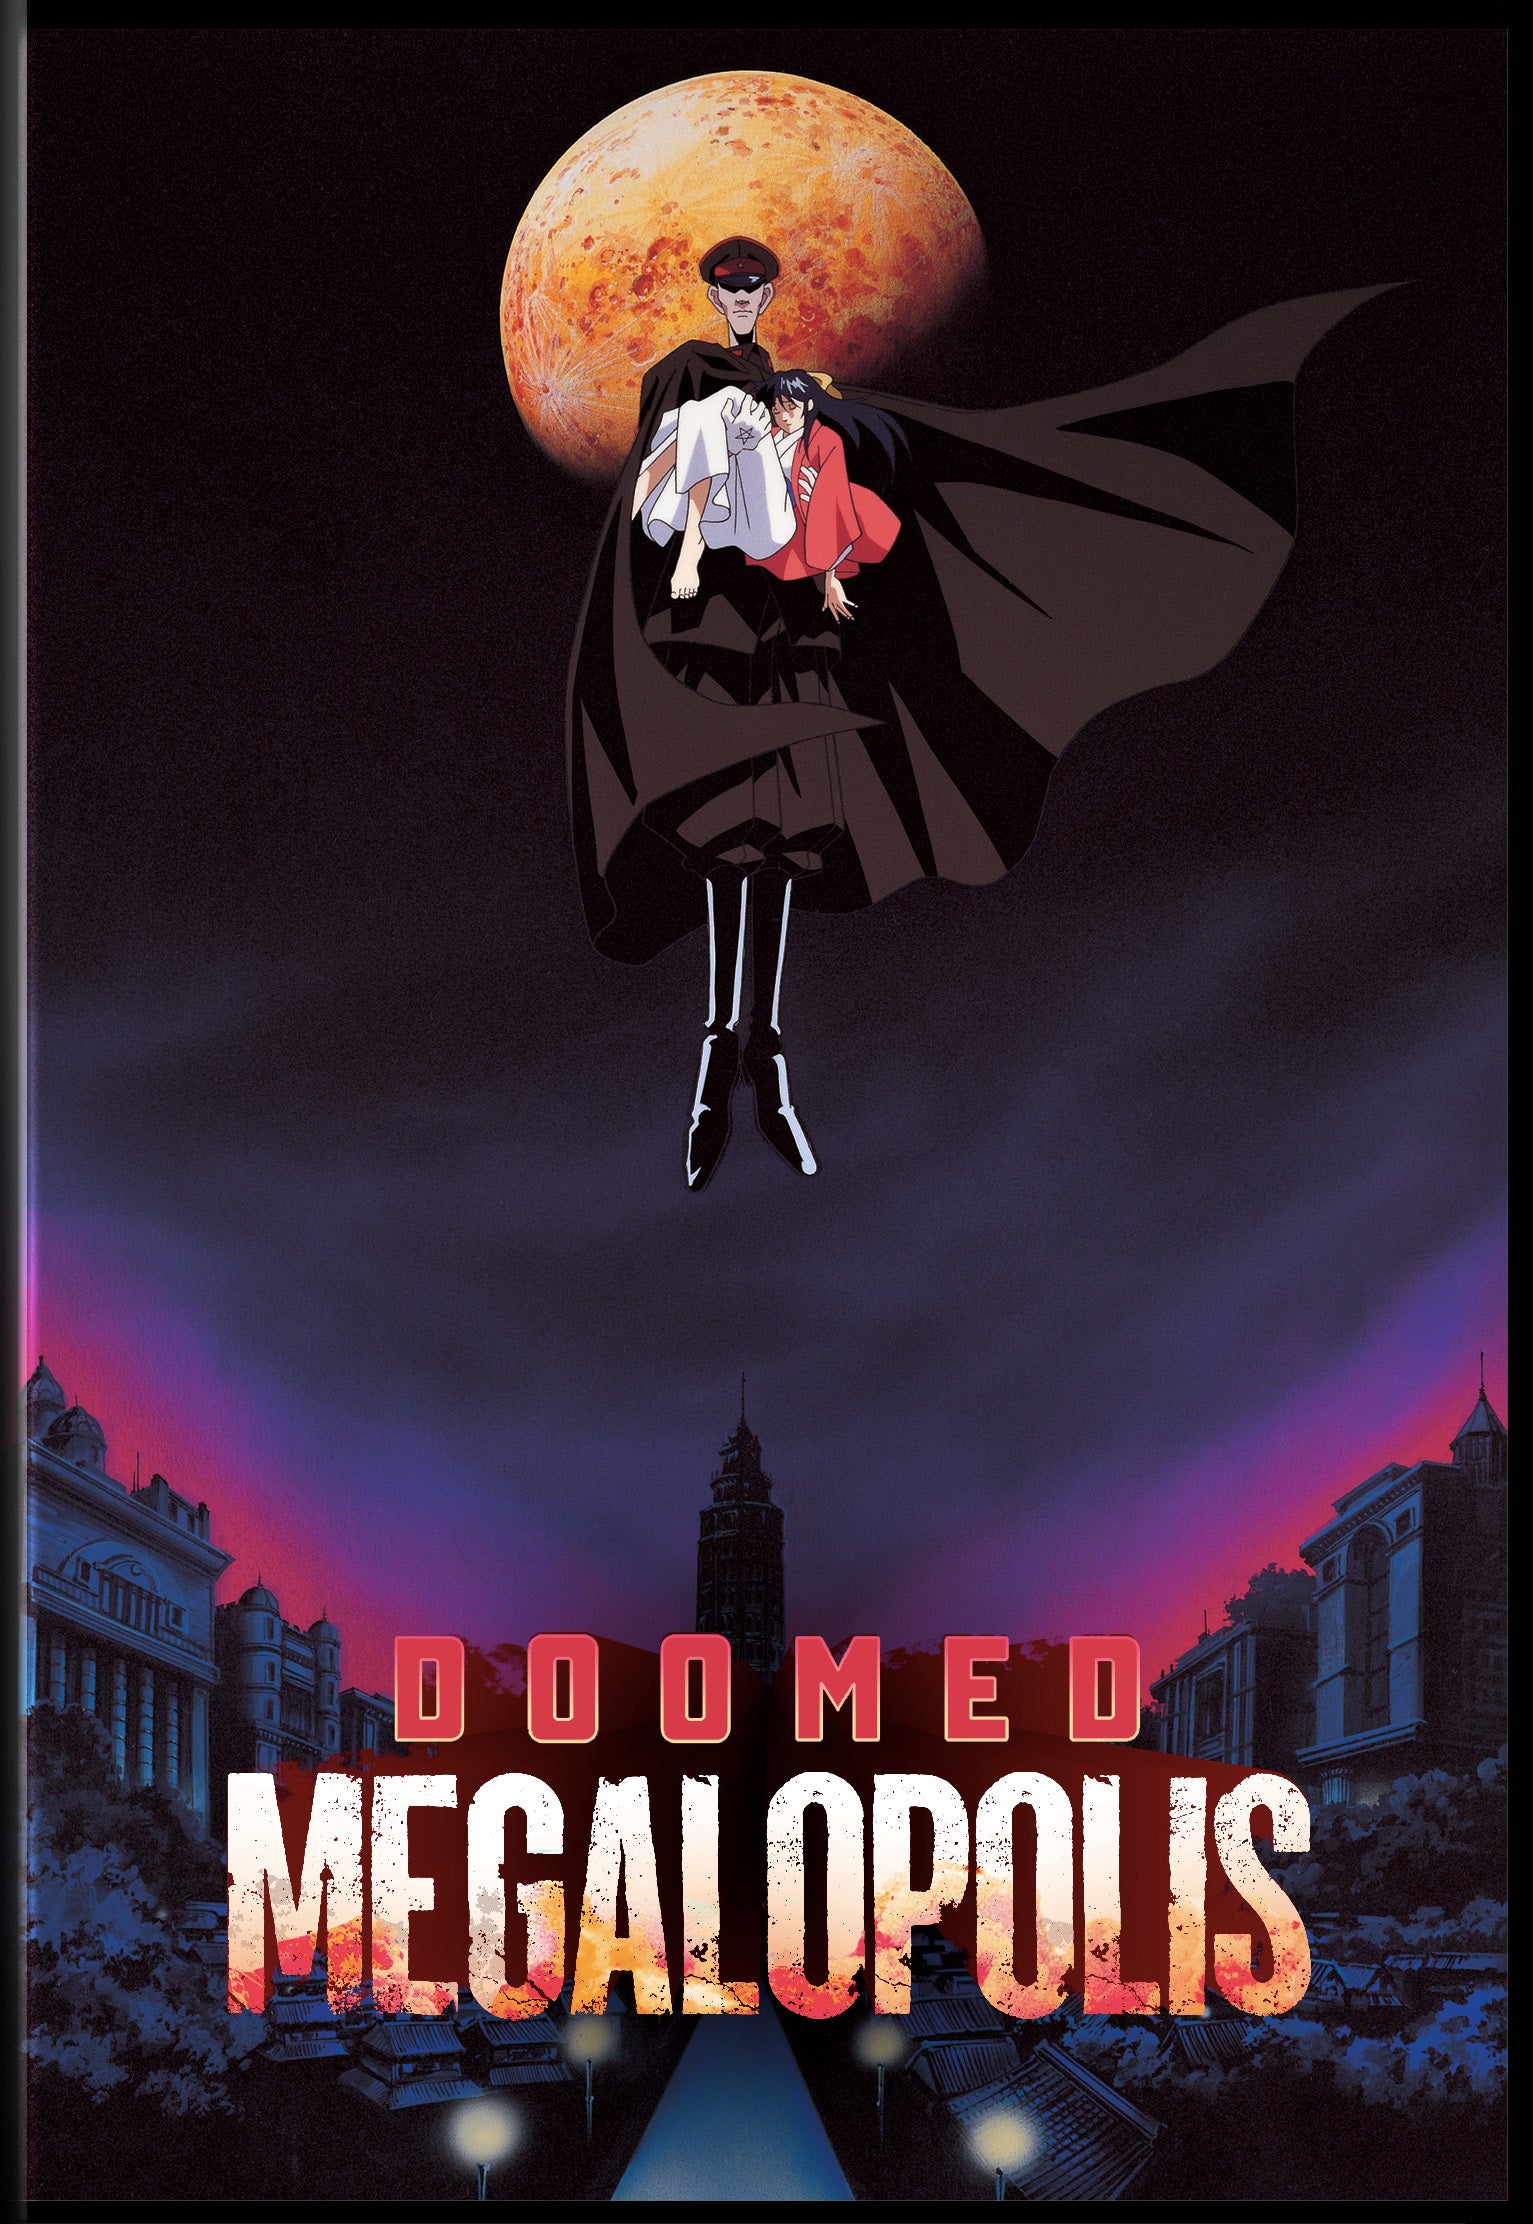 Watch Doomed Megalopolis (Subbed) S01:E01 - The Haun - Free TV